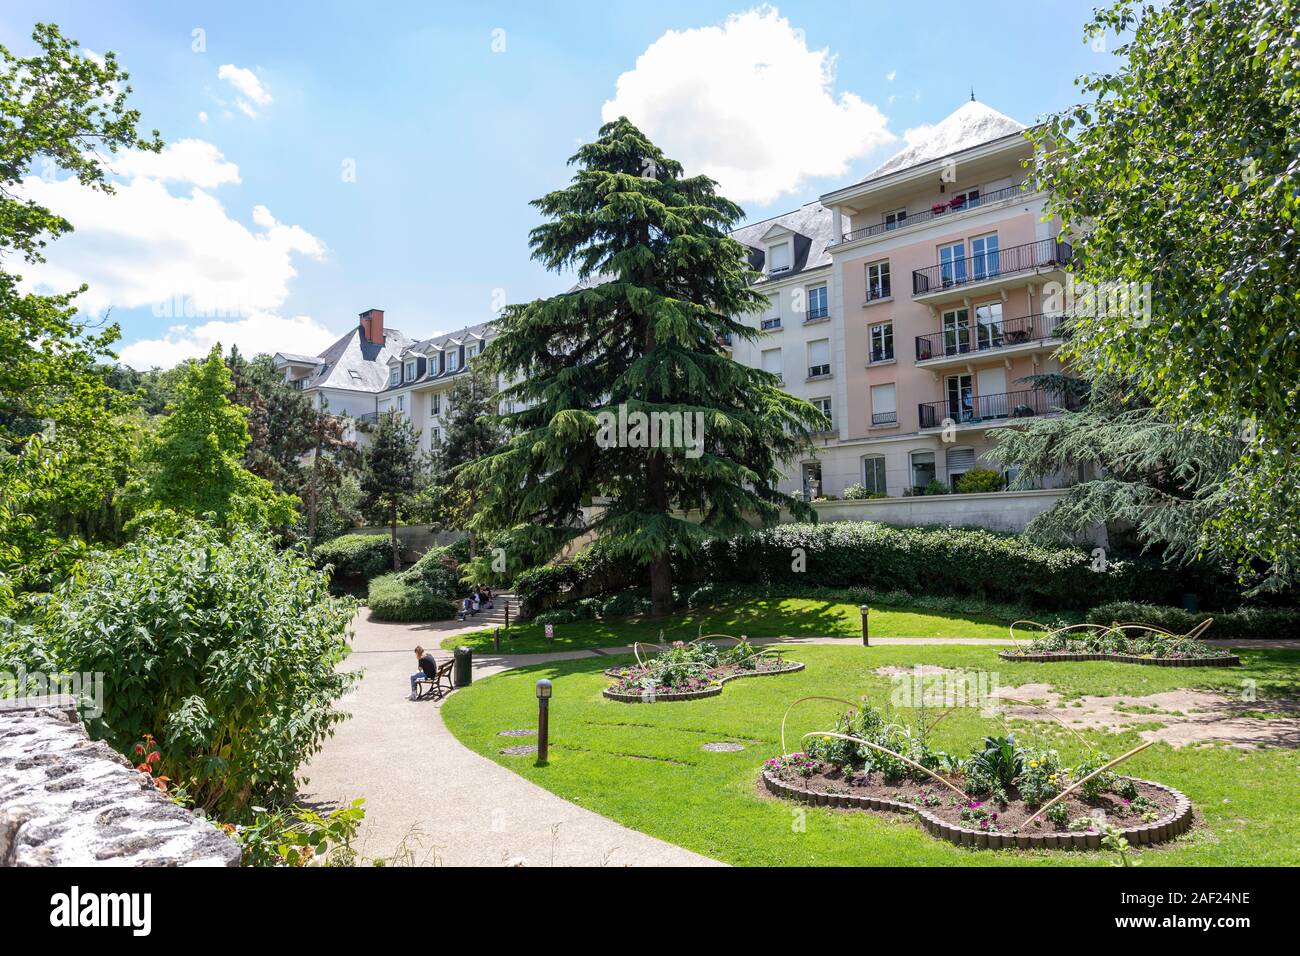 Le Plessis-Robinson (Paris area): real estate, buildings and park of the Town Hall, in the district of Coeur de ville. Stock Photo